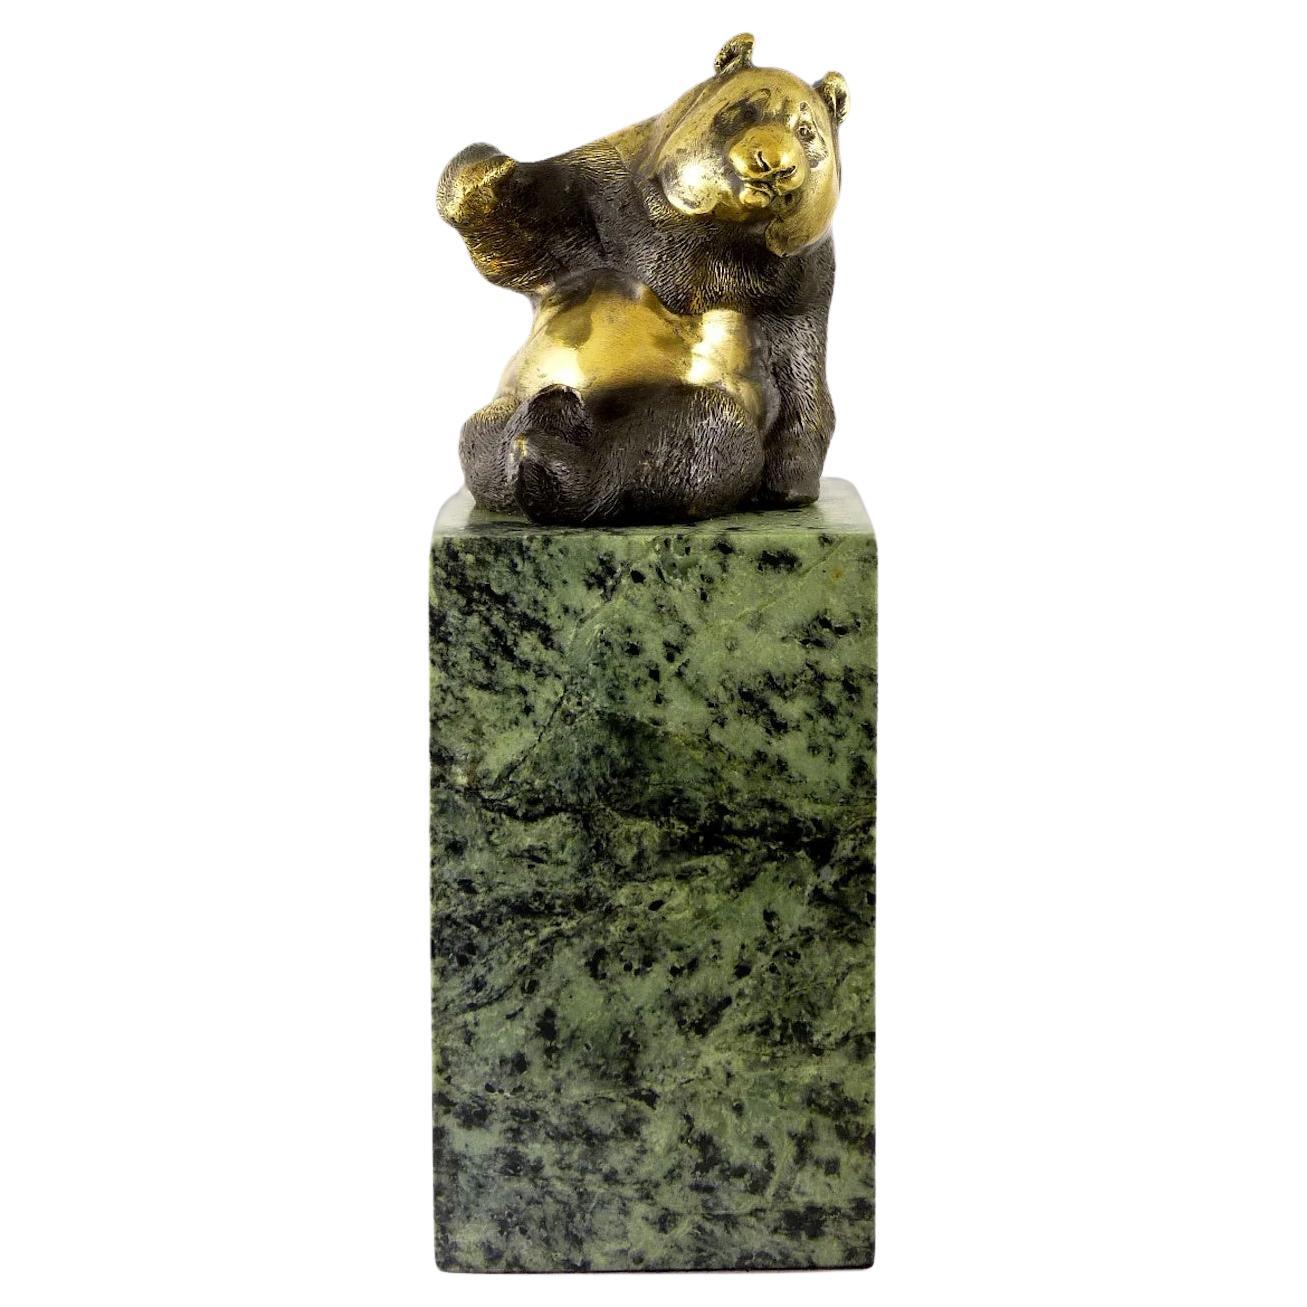 Gilded Bronze Sculpture with Patina Representing a Panda, 20th Century.